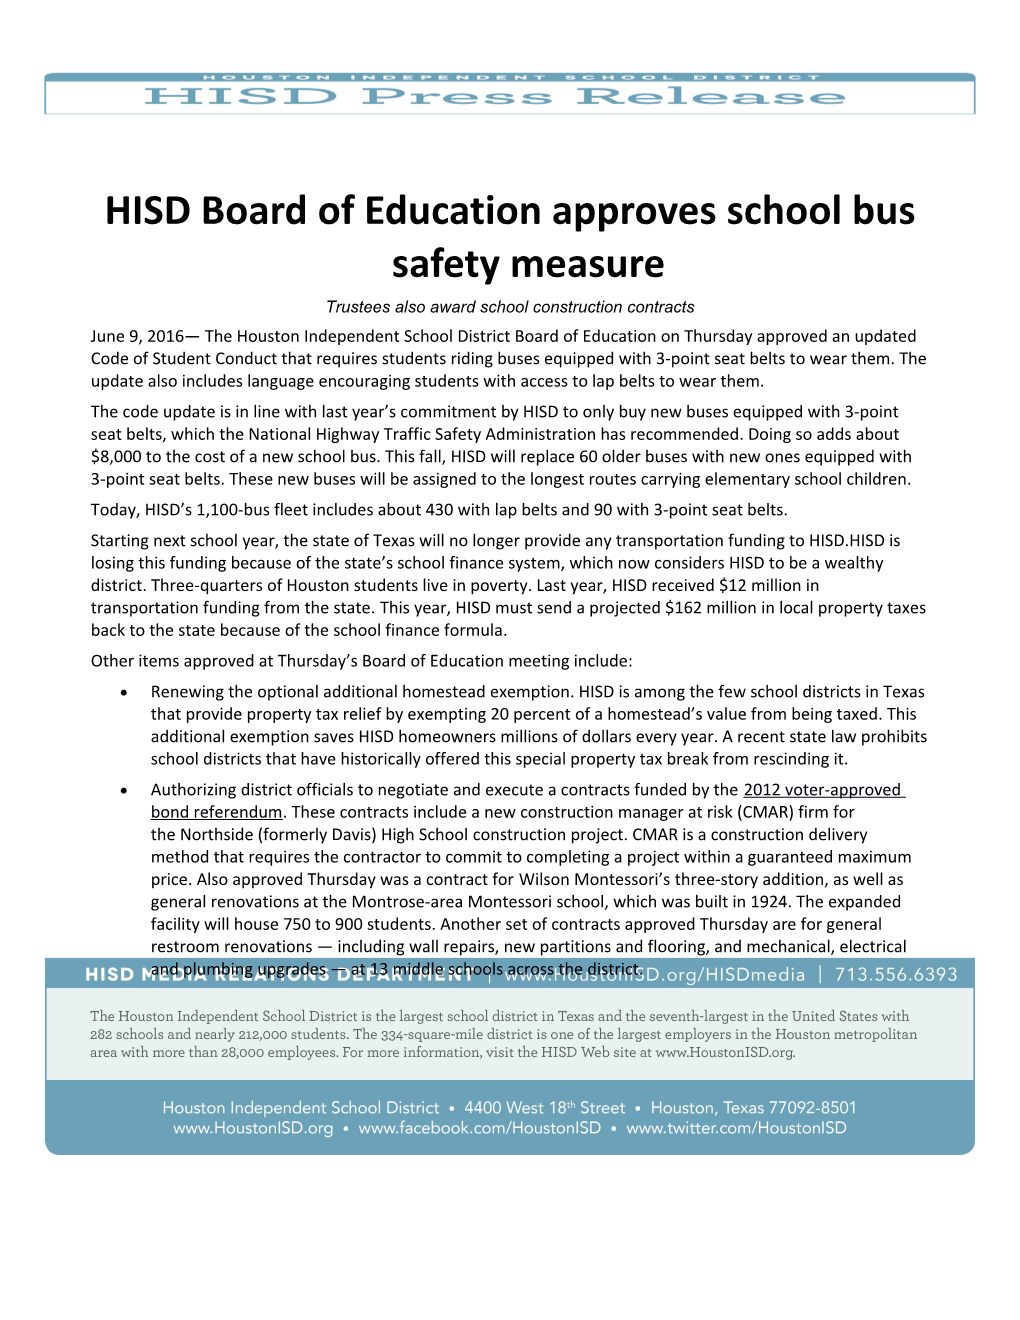 HISD Board of Education Approves School Bus Safety Measure